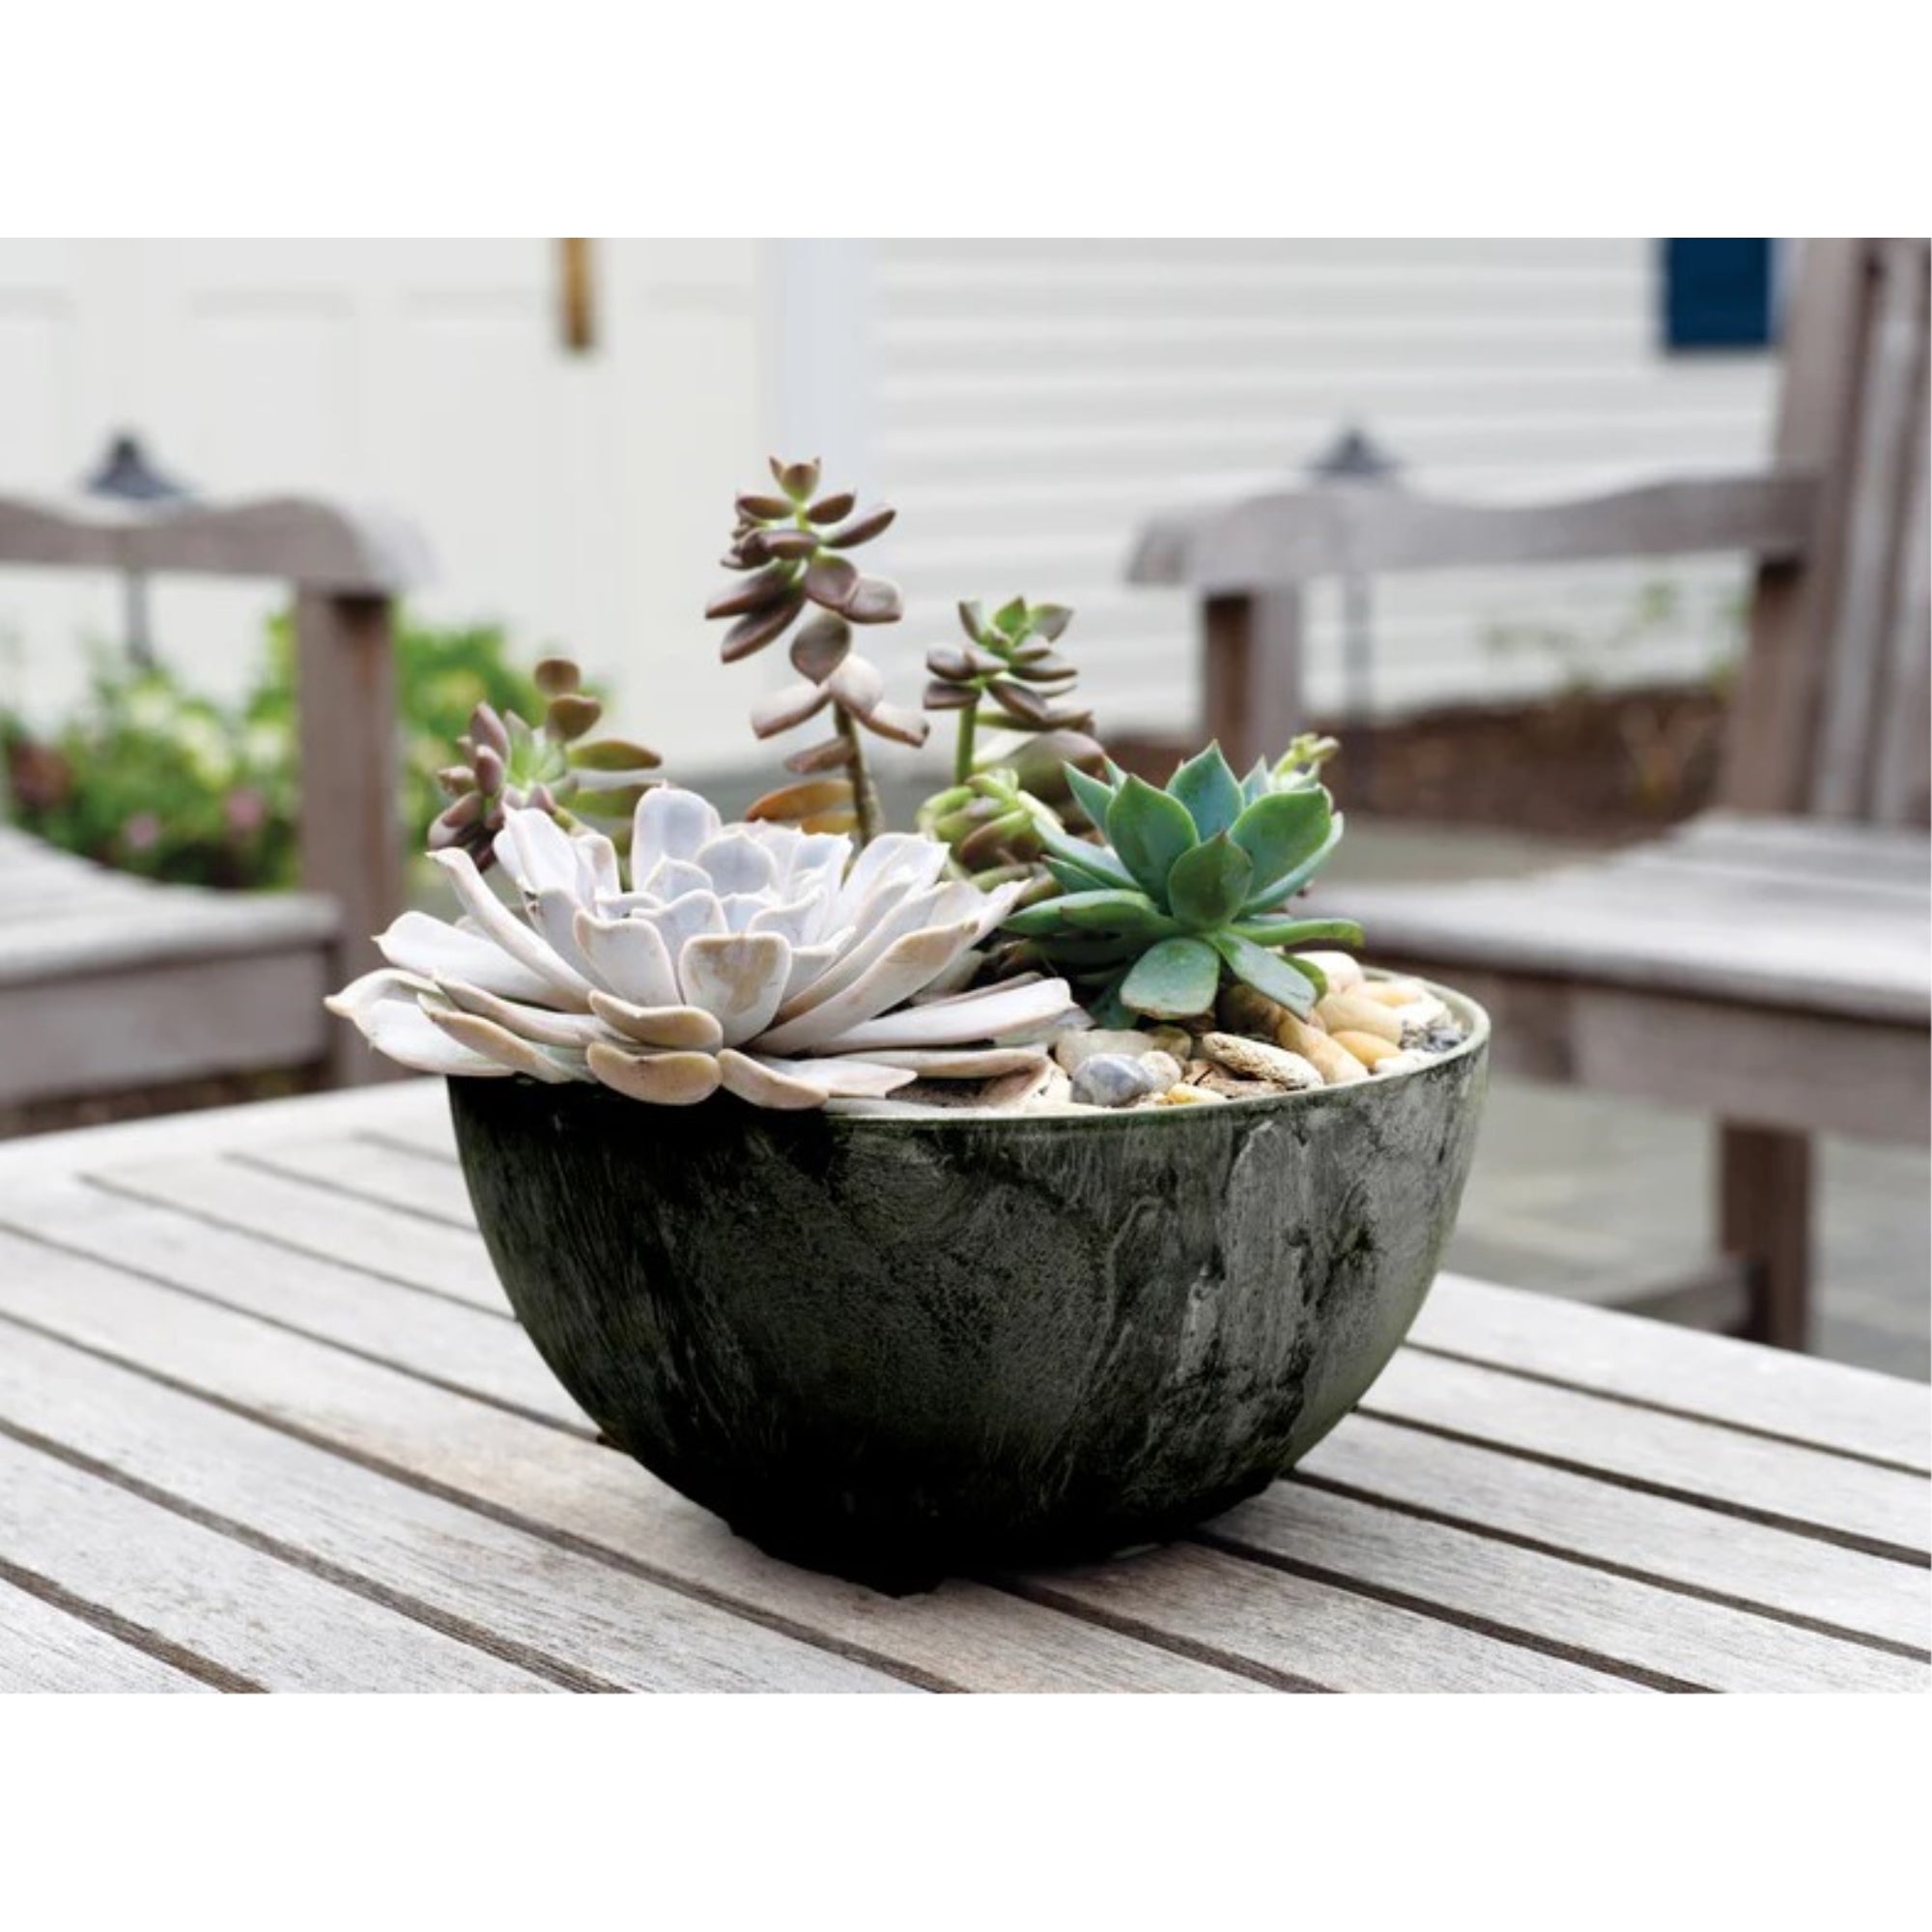 Novelty Indoor/Outdoor Artstone Napa Bowl Planter with Water-Minder System